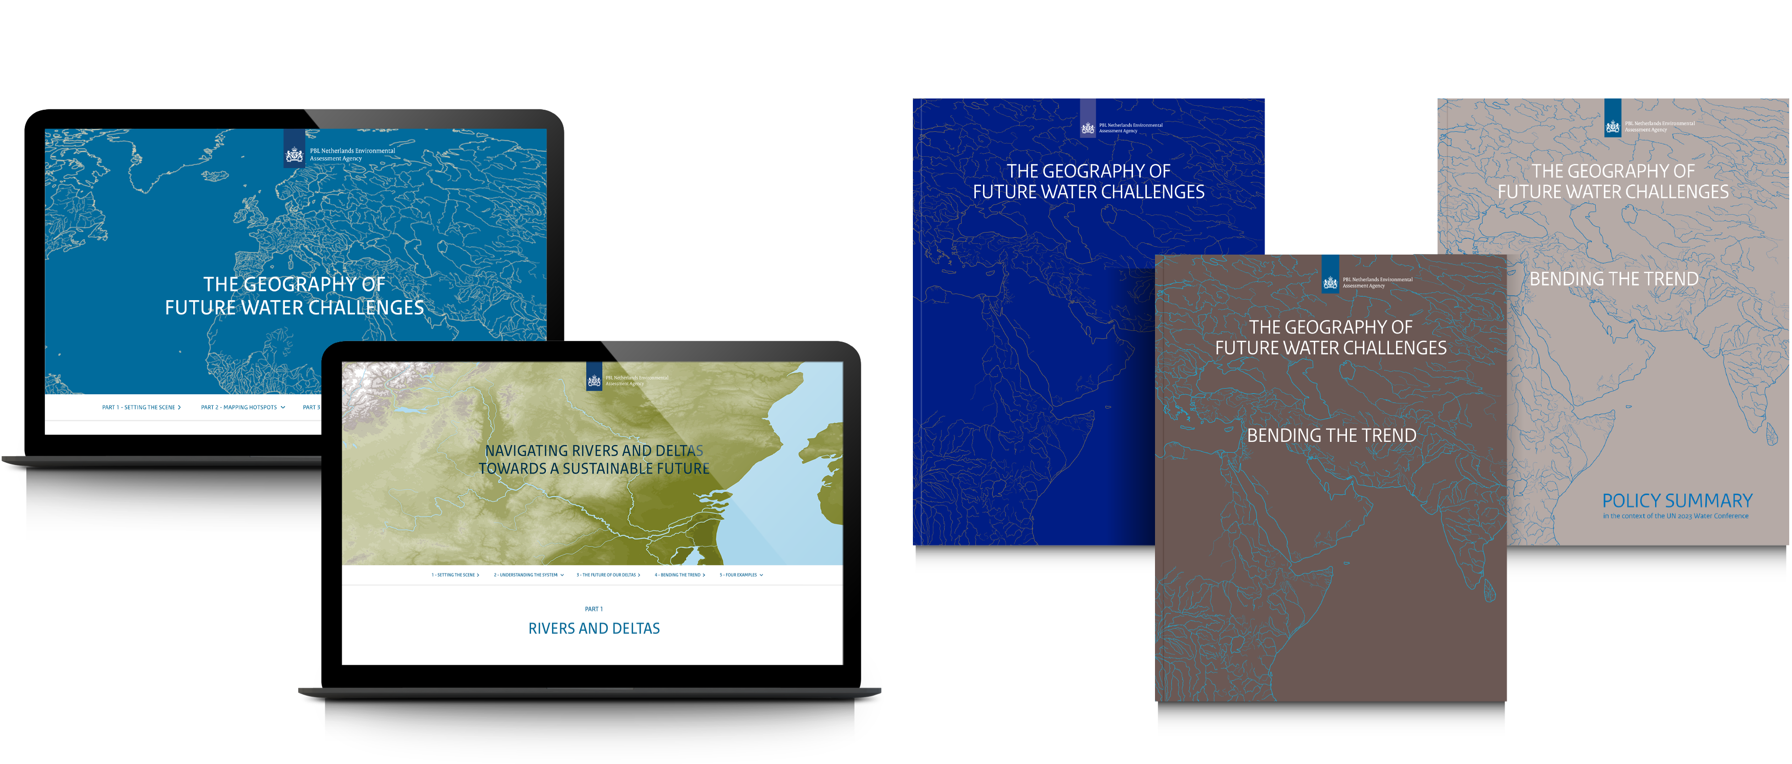 other The Geography of Future Water Challenges products